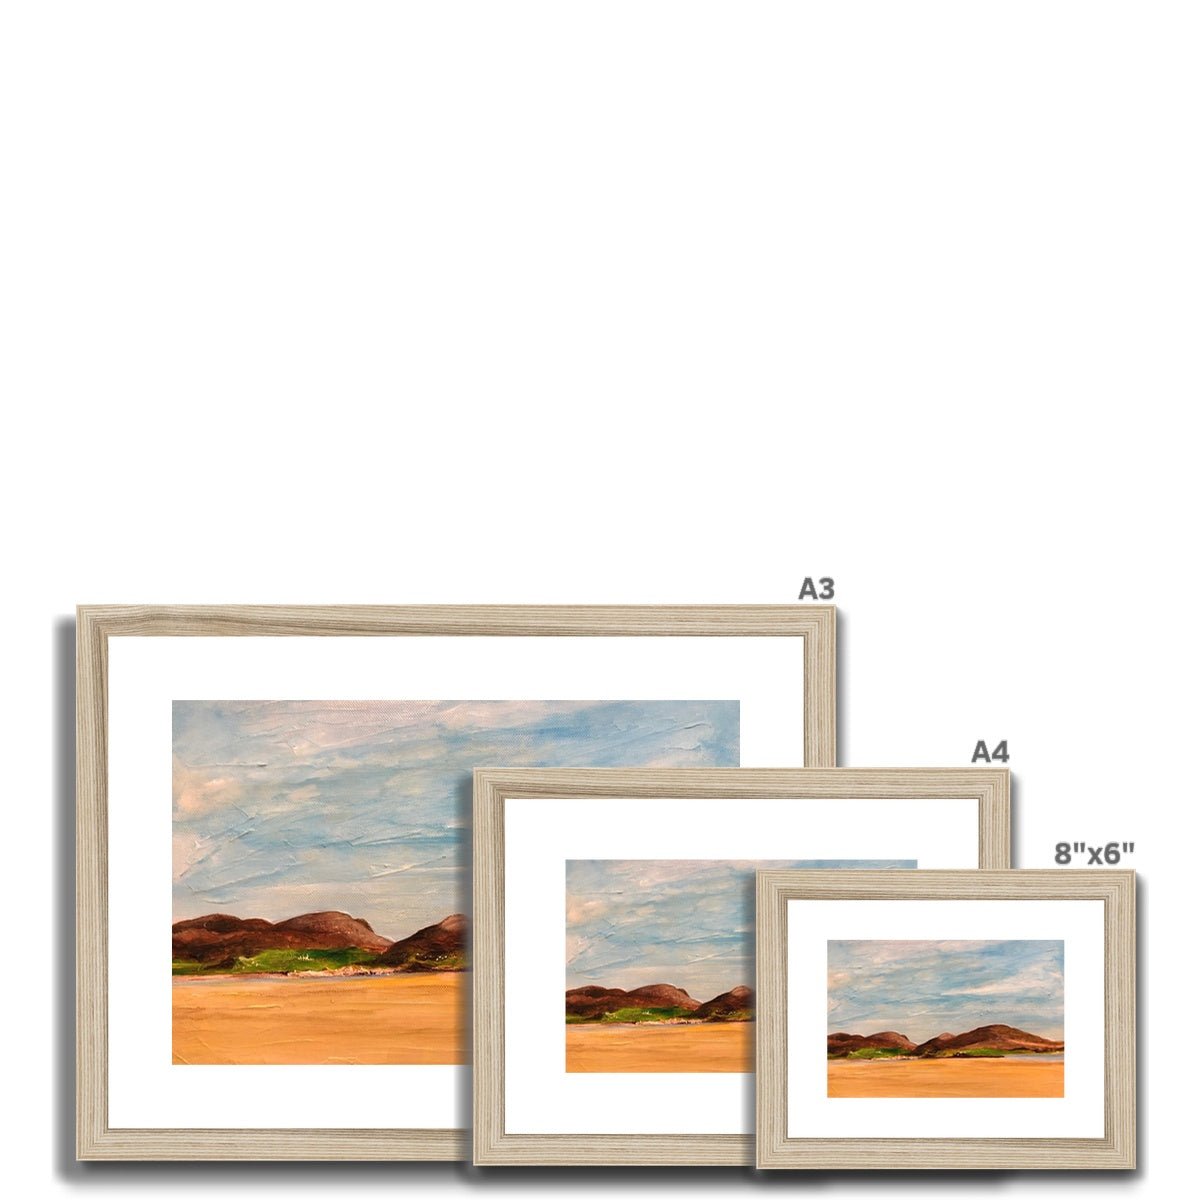 Uig Sands Lewis Painting | Framed & Mounted Prints From Scotland-Framed & Mounted Prints-Hebridean Islands Art Gallery-Paintings, Prints, Homeware, Art Gifts From Scotland By Scottish Artist Kevin Hunter